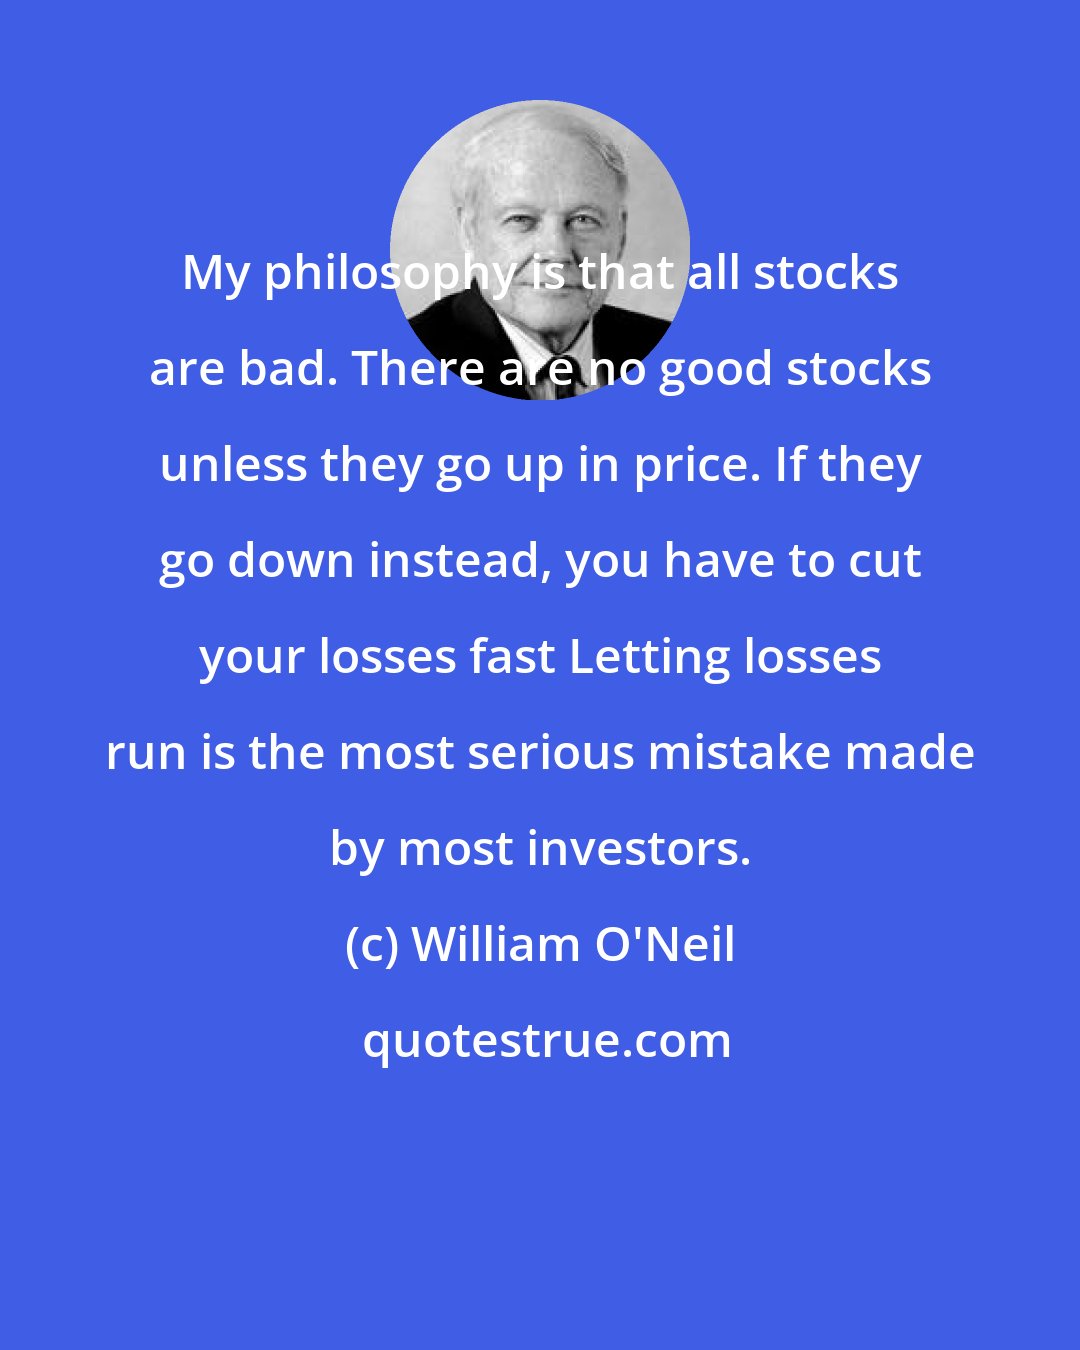 William O'Neil: My philosophy is that all stocks are bad. There are no good stocks unless they go up in price. If they go down instead, you have to cut your losses fast Letting losses run is the most serious mistake made by most investors.